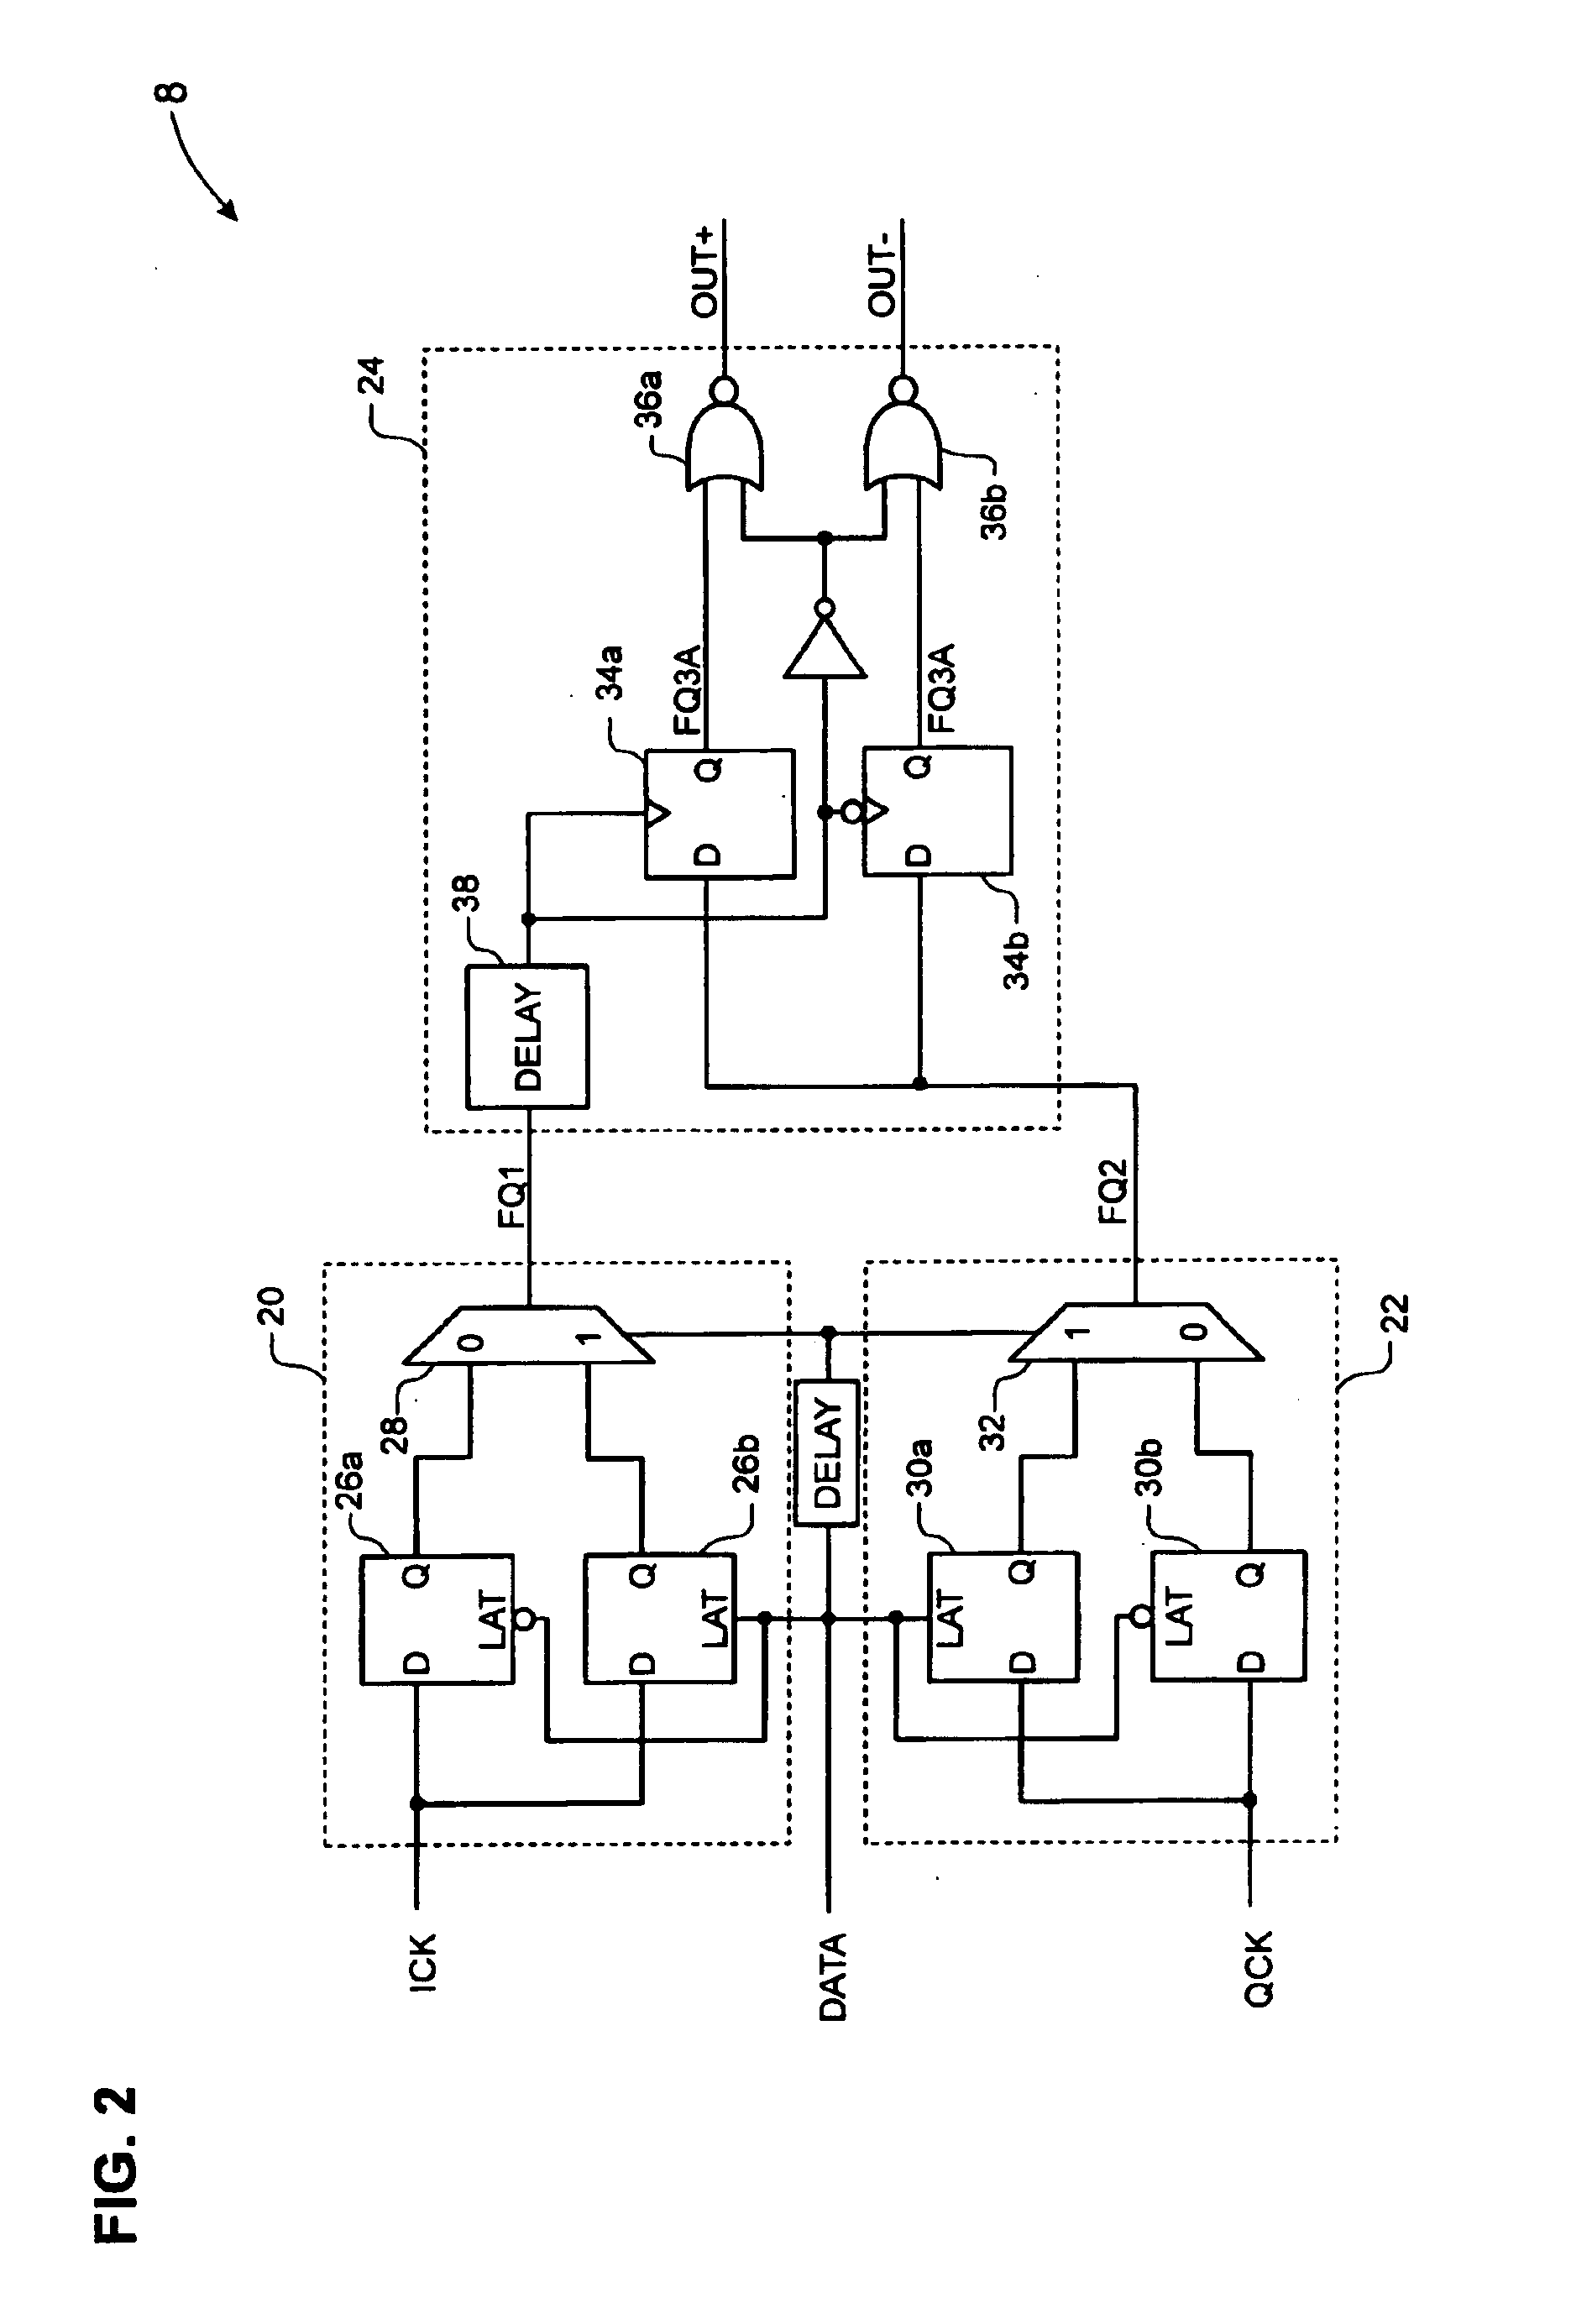 Method and apparatus for clock recovery and data qualification